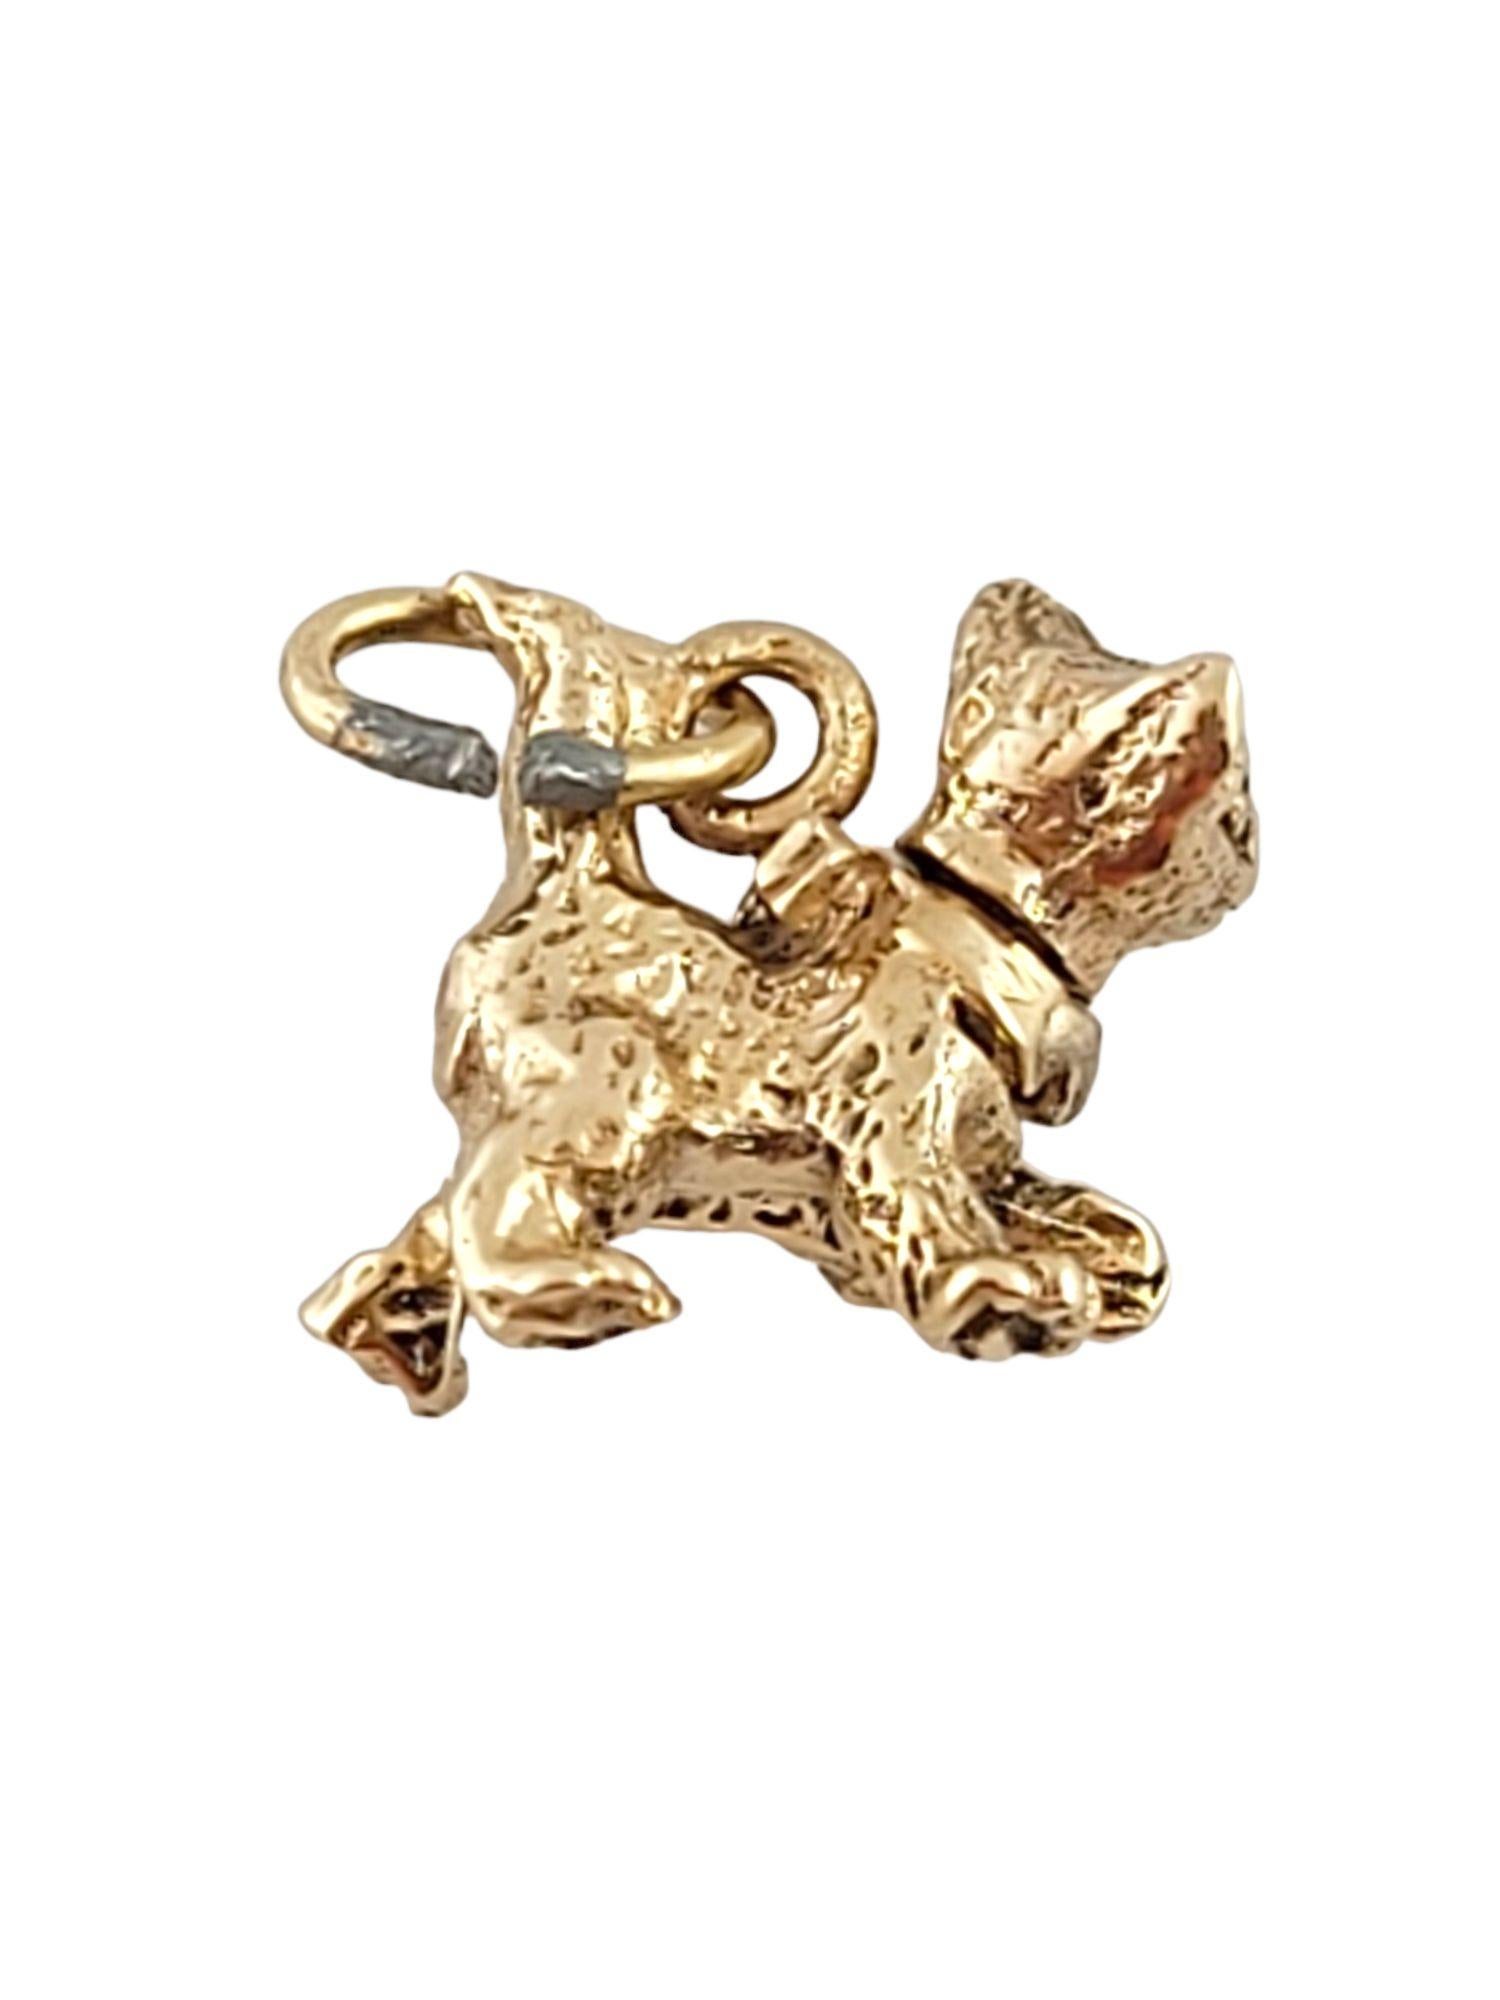 This adorable cat charm crafted from 14K yellow gold is the perfect charm for any cat lover!

Size: 10.6mm X 13.3mm X 6.4mm

Length w/ bail: 13.9mm

Weight: 1.98 g/ 1.3 dwt

Hallmark: 14K

Very good condition, professionally polished.

Will come